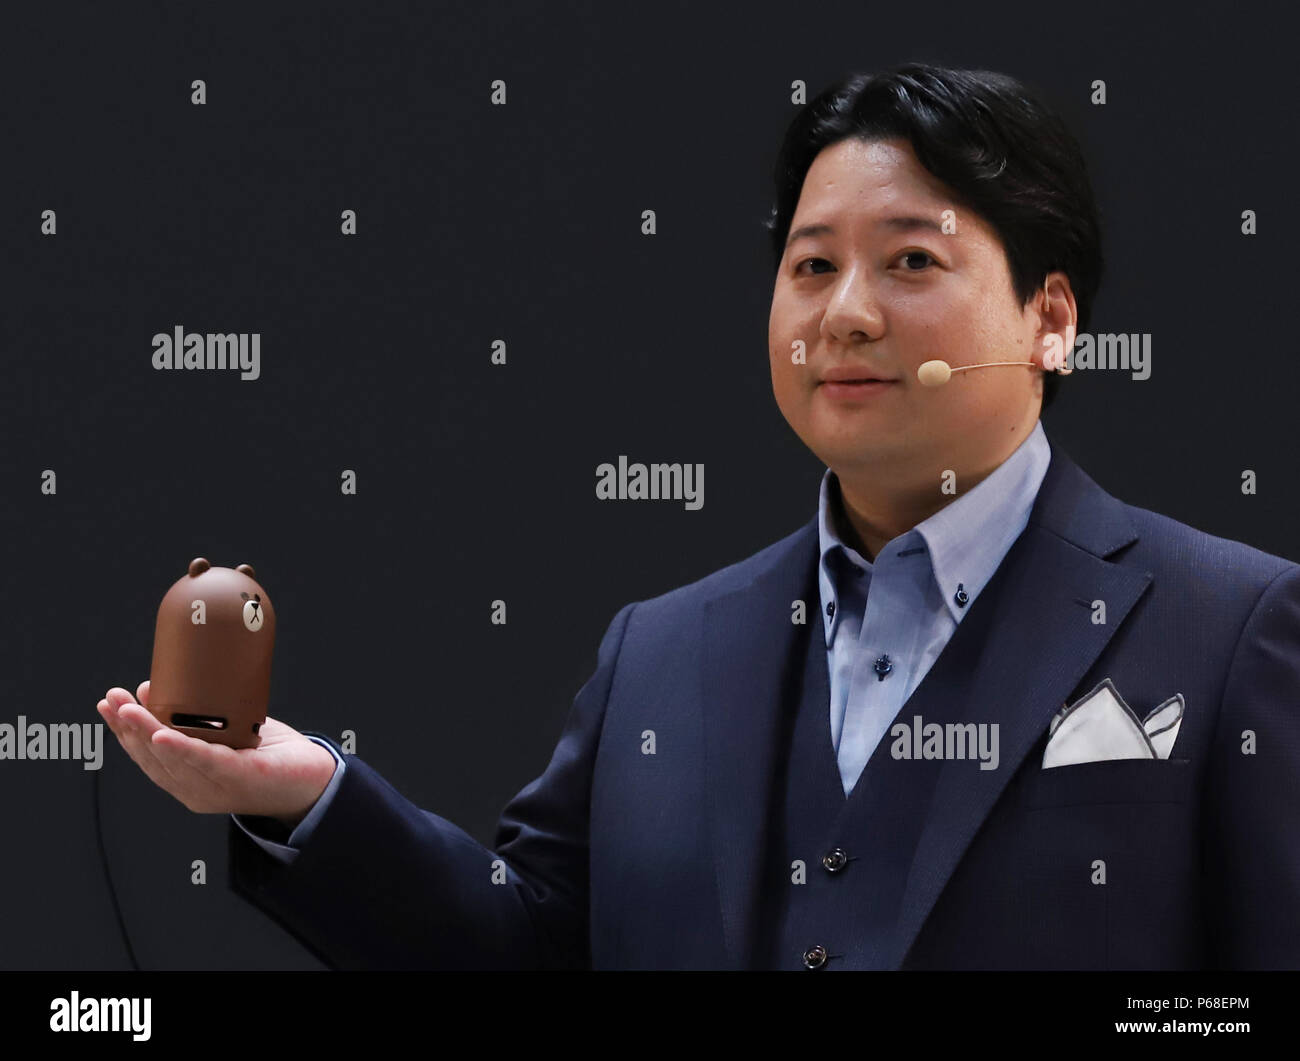 Urayasu, Japan. 28th June, 2018. Japan's SNS giant LINE chief strategy officer Jun Masuda displays the company's smart speaker 'Clova Friends mini' at the LINE conference 2018 in Urayasu, suburban Tokyo on Thursday, June 28, 2018. LINE announced the new service of 'Clova Auto', a system linking LINE's smart speaker Clova and automobiles of Toyota Motor Corporation to provide in-vehicle voice operation services. Credit: Yoshio Tsunoda/AFLO/Alamy Live News Stock Photo